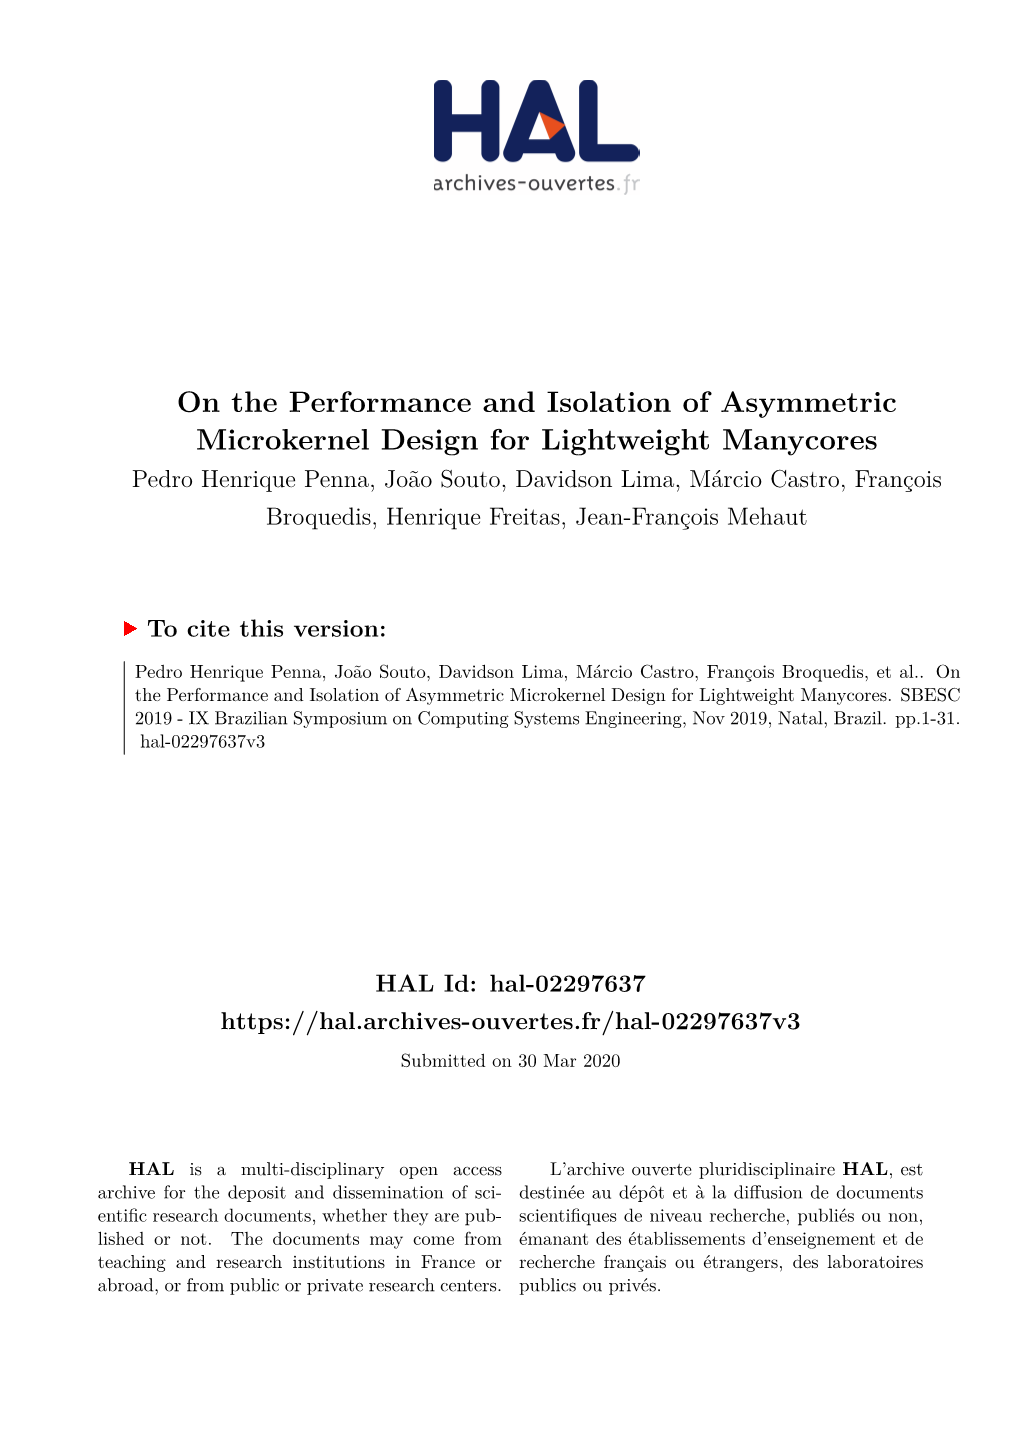 On the Performance and Isolation of Asymmetric Microkernel Design For